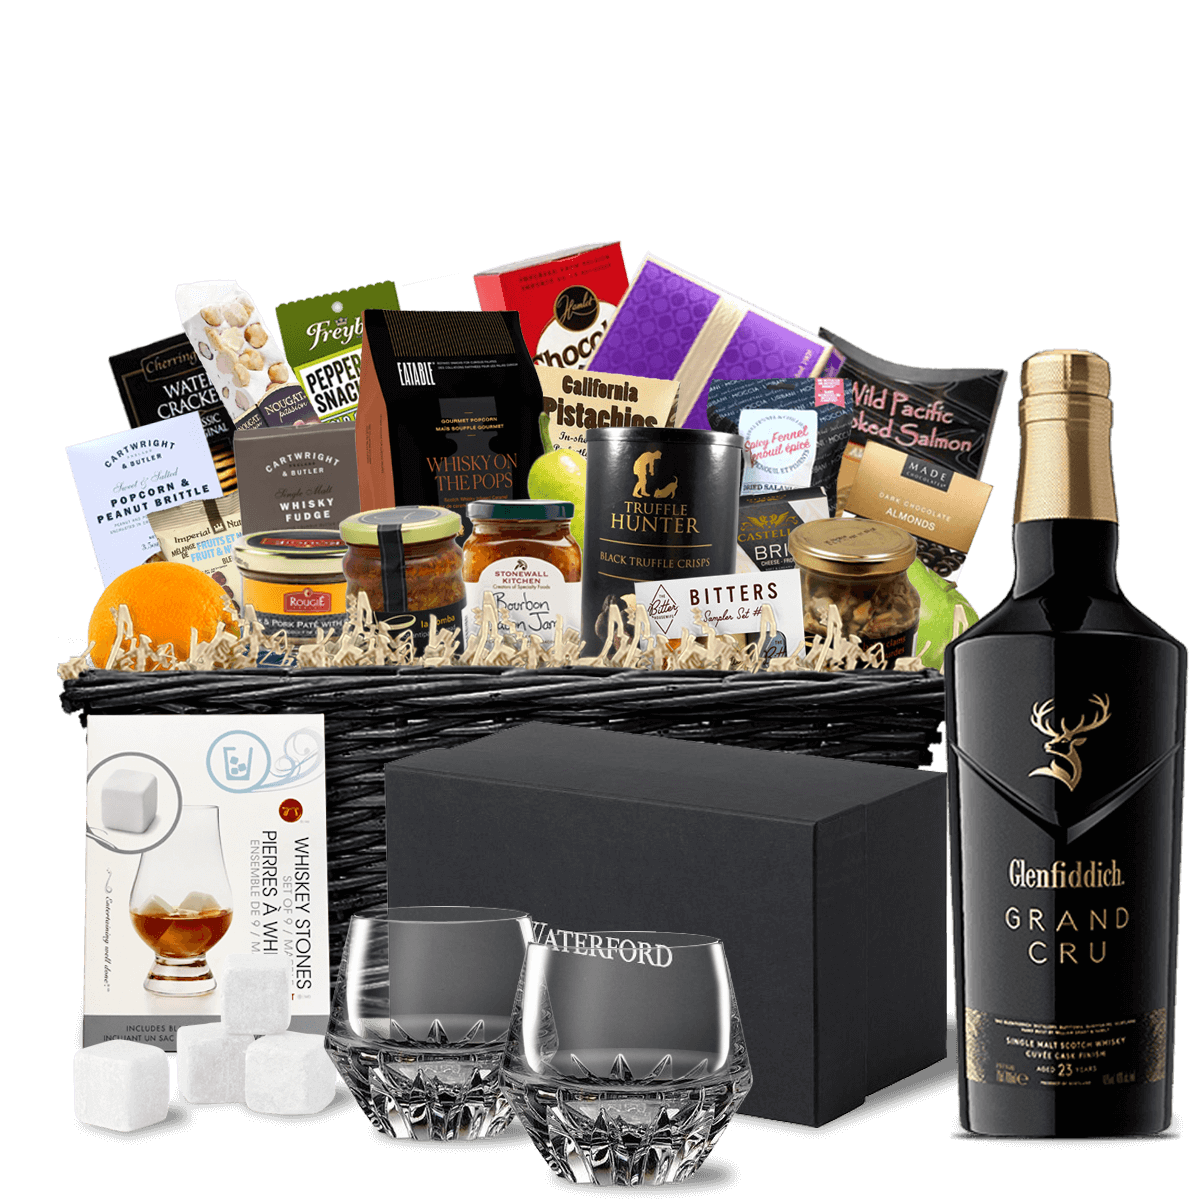 TAG Liquor Stores BC - Glenfiddich Grand Cru Scotch Whisky Ultra Luxe Gift Basket